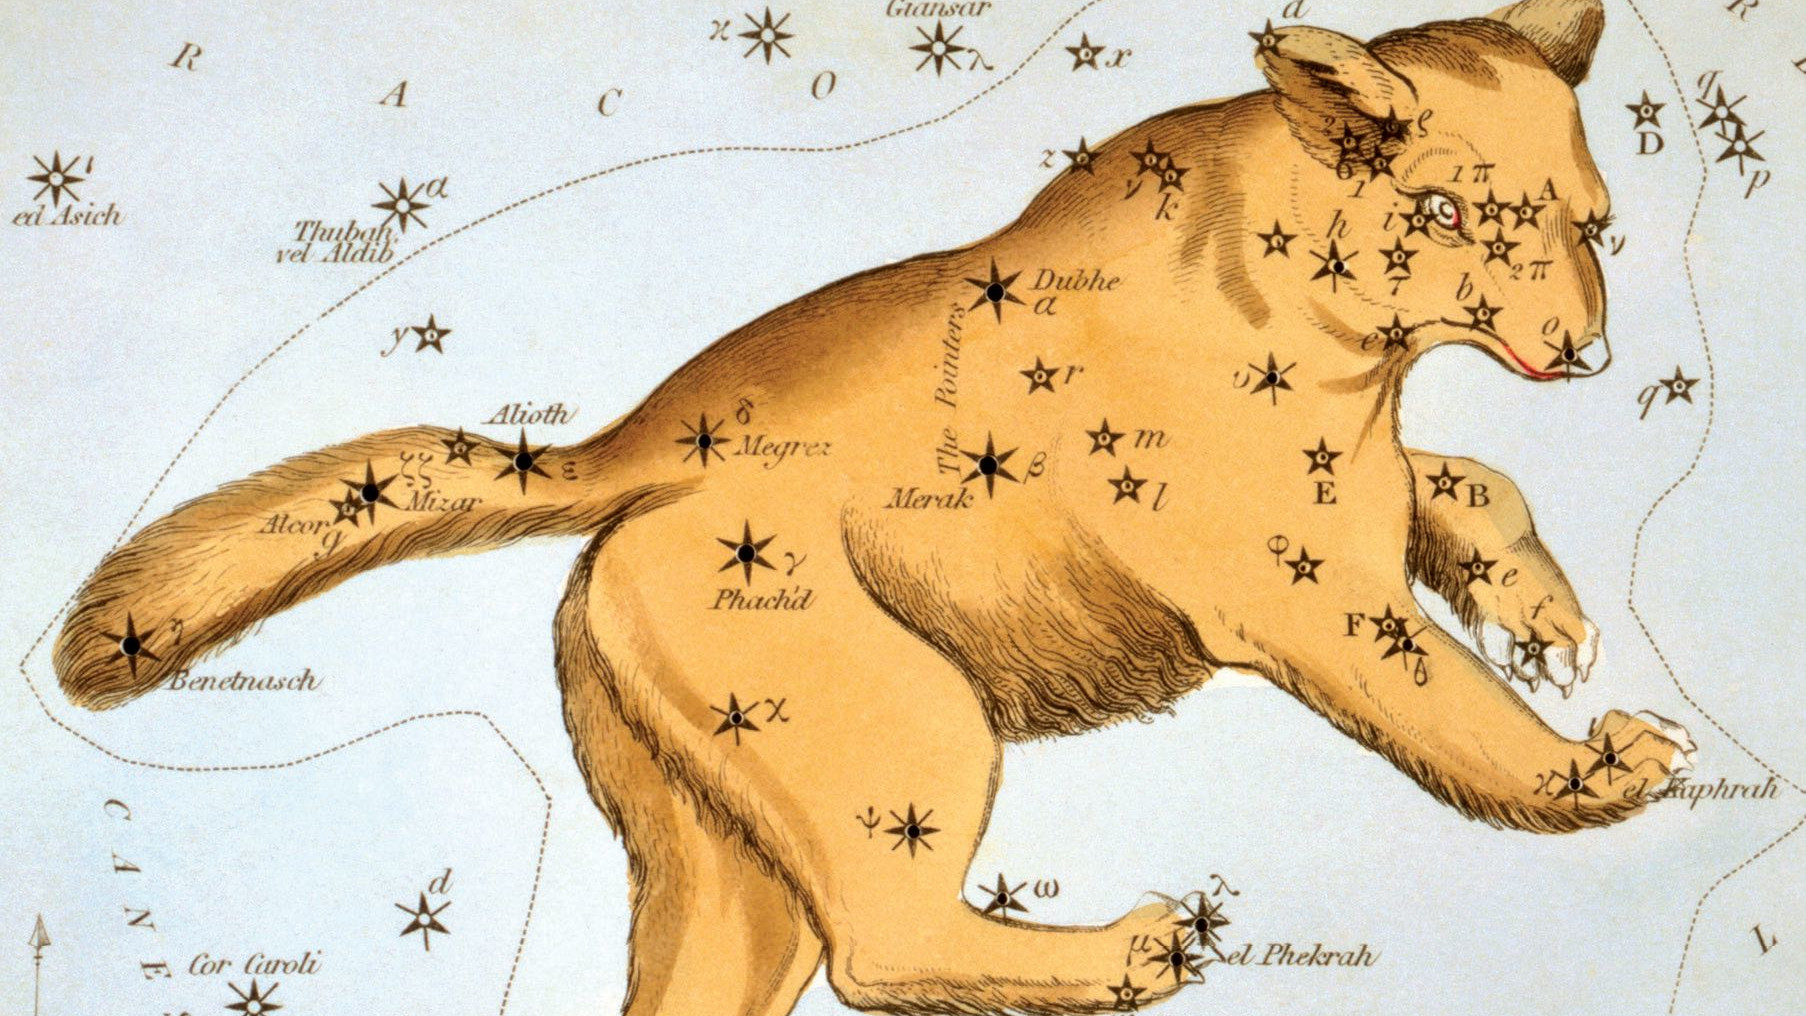 At the rear of Ursa Major there is the most well-known asterism, or grouping of stars, the Big Dipper.